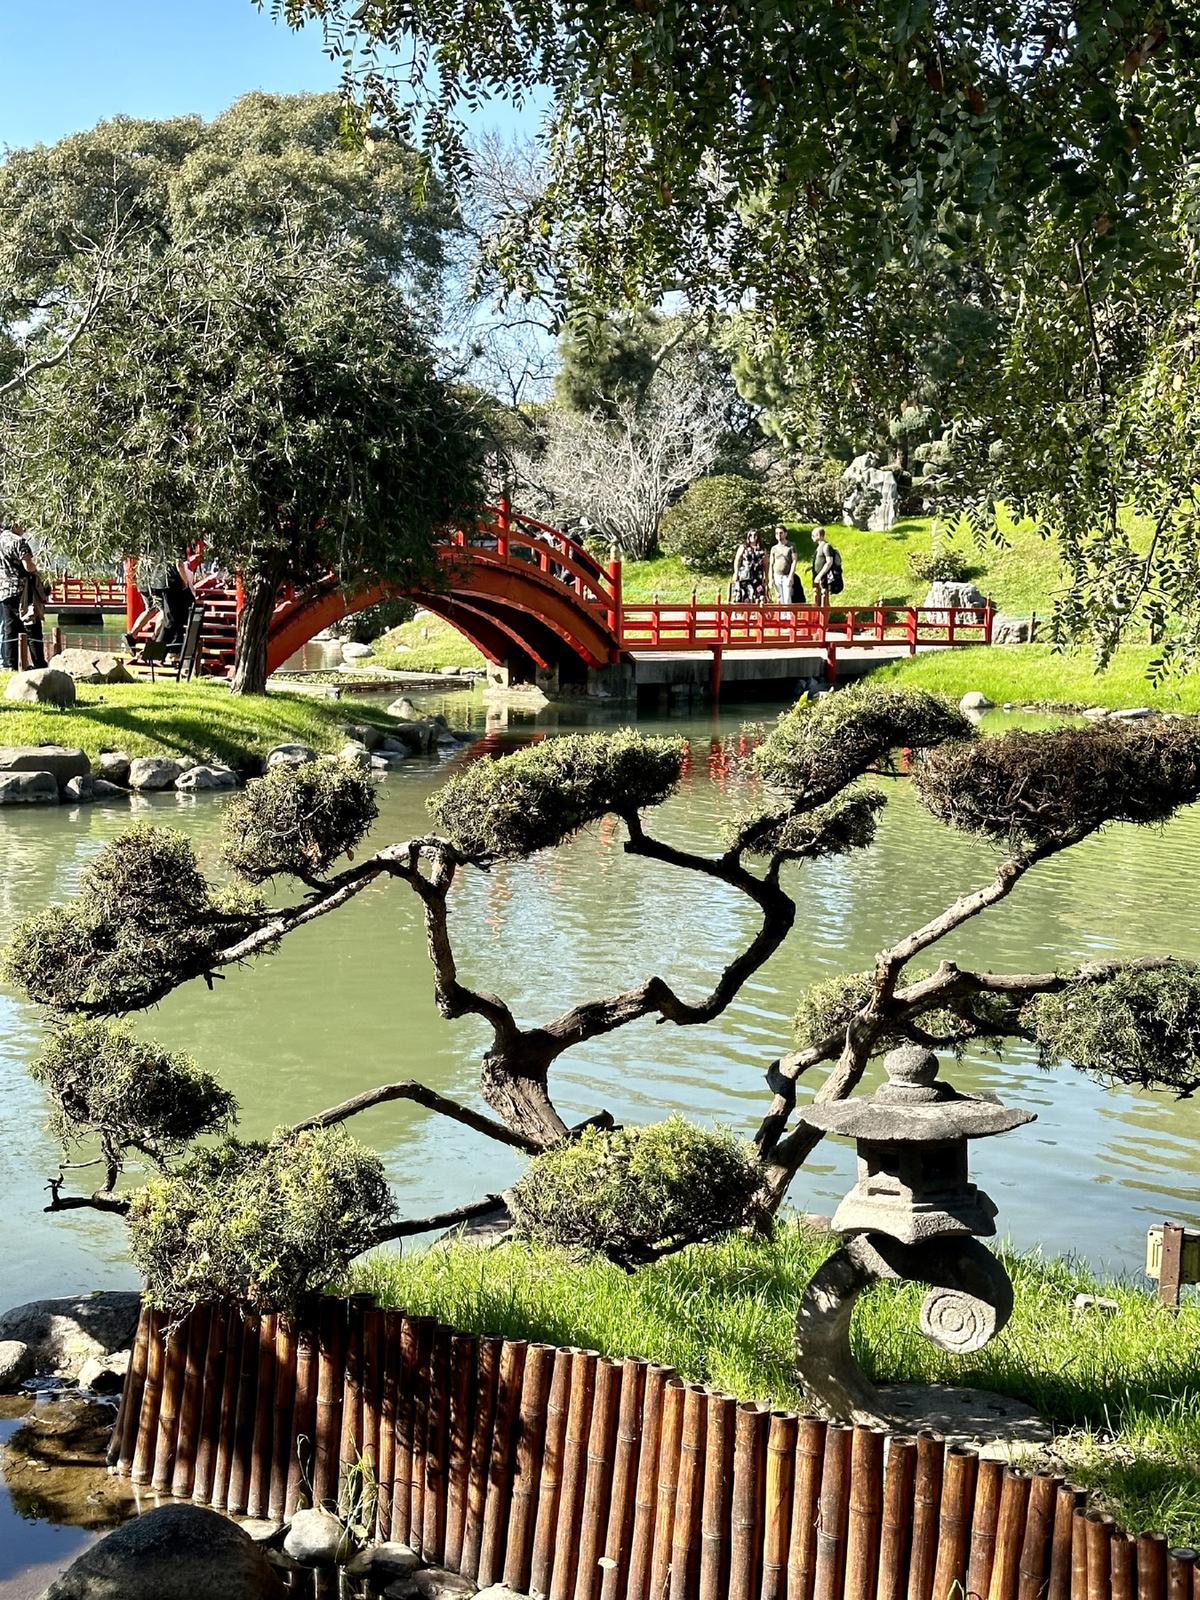 The Jardin Japones, situated near Tres de Febrero Park in Buenos Aires, Argentina, is a great place to relax while in the city. (Photo courtesy of Margot Black)